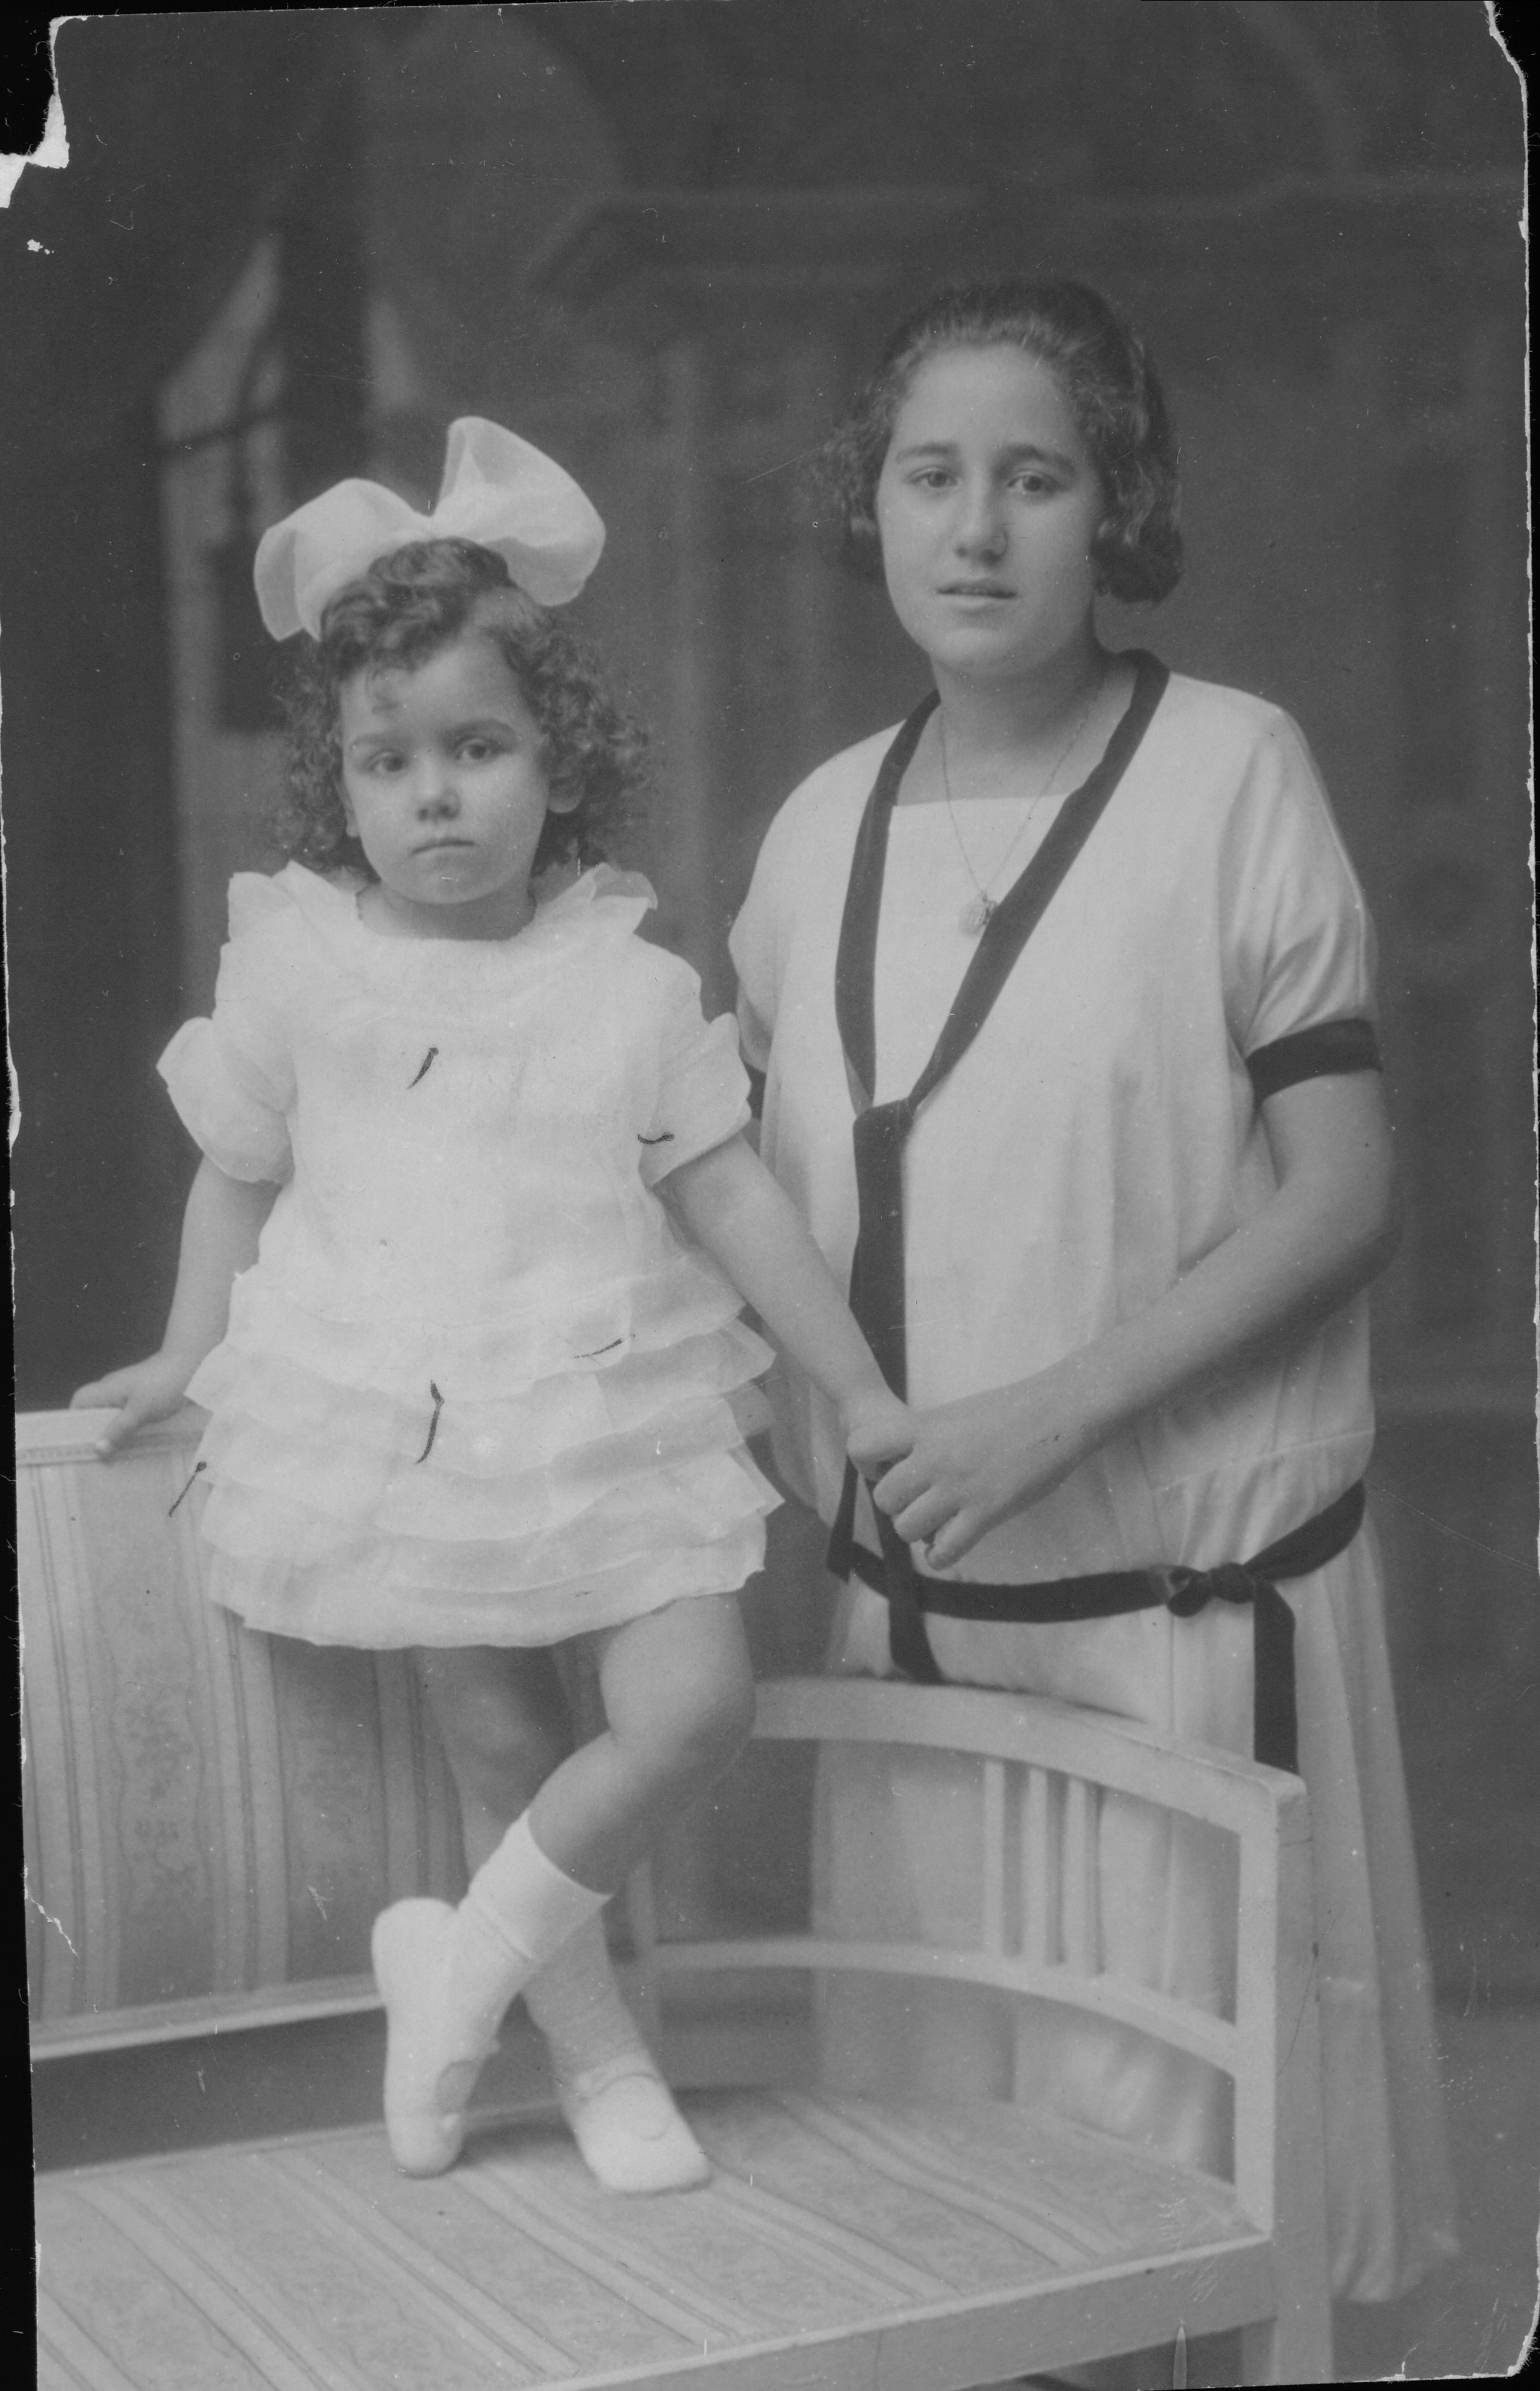 My mother (left) 1925 
